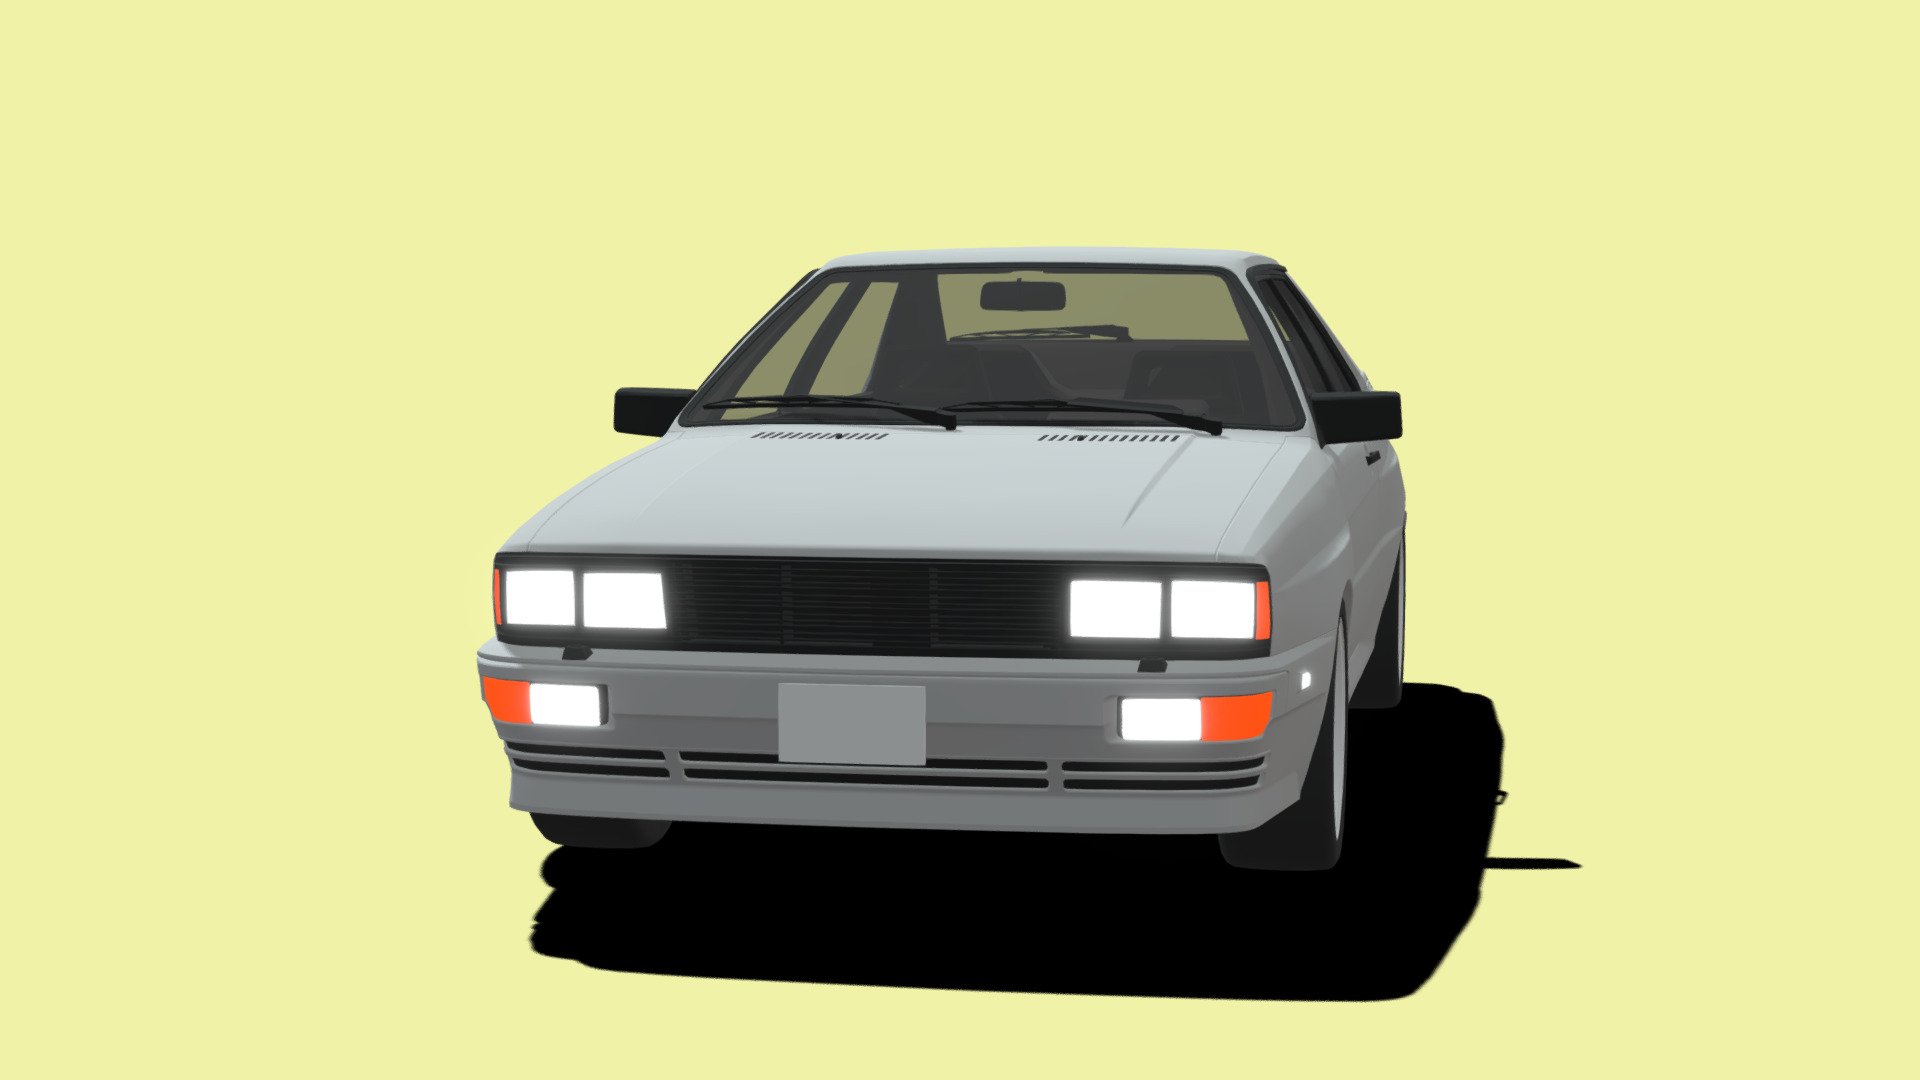 3D Stylized Model of the Audi Quattro. 

This car is part of the series “Japan”, discover all my models in the same style ! 

Get this 3D model when you buy the complete TOON Japan package ! 
https://linktr.ee/lepoint_bat - TOON Japan (Bonus) : Audi Quattro - 3D model by LePoint_BAT (@LePointBAT) 3d model